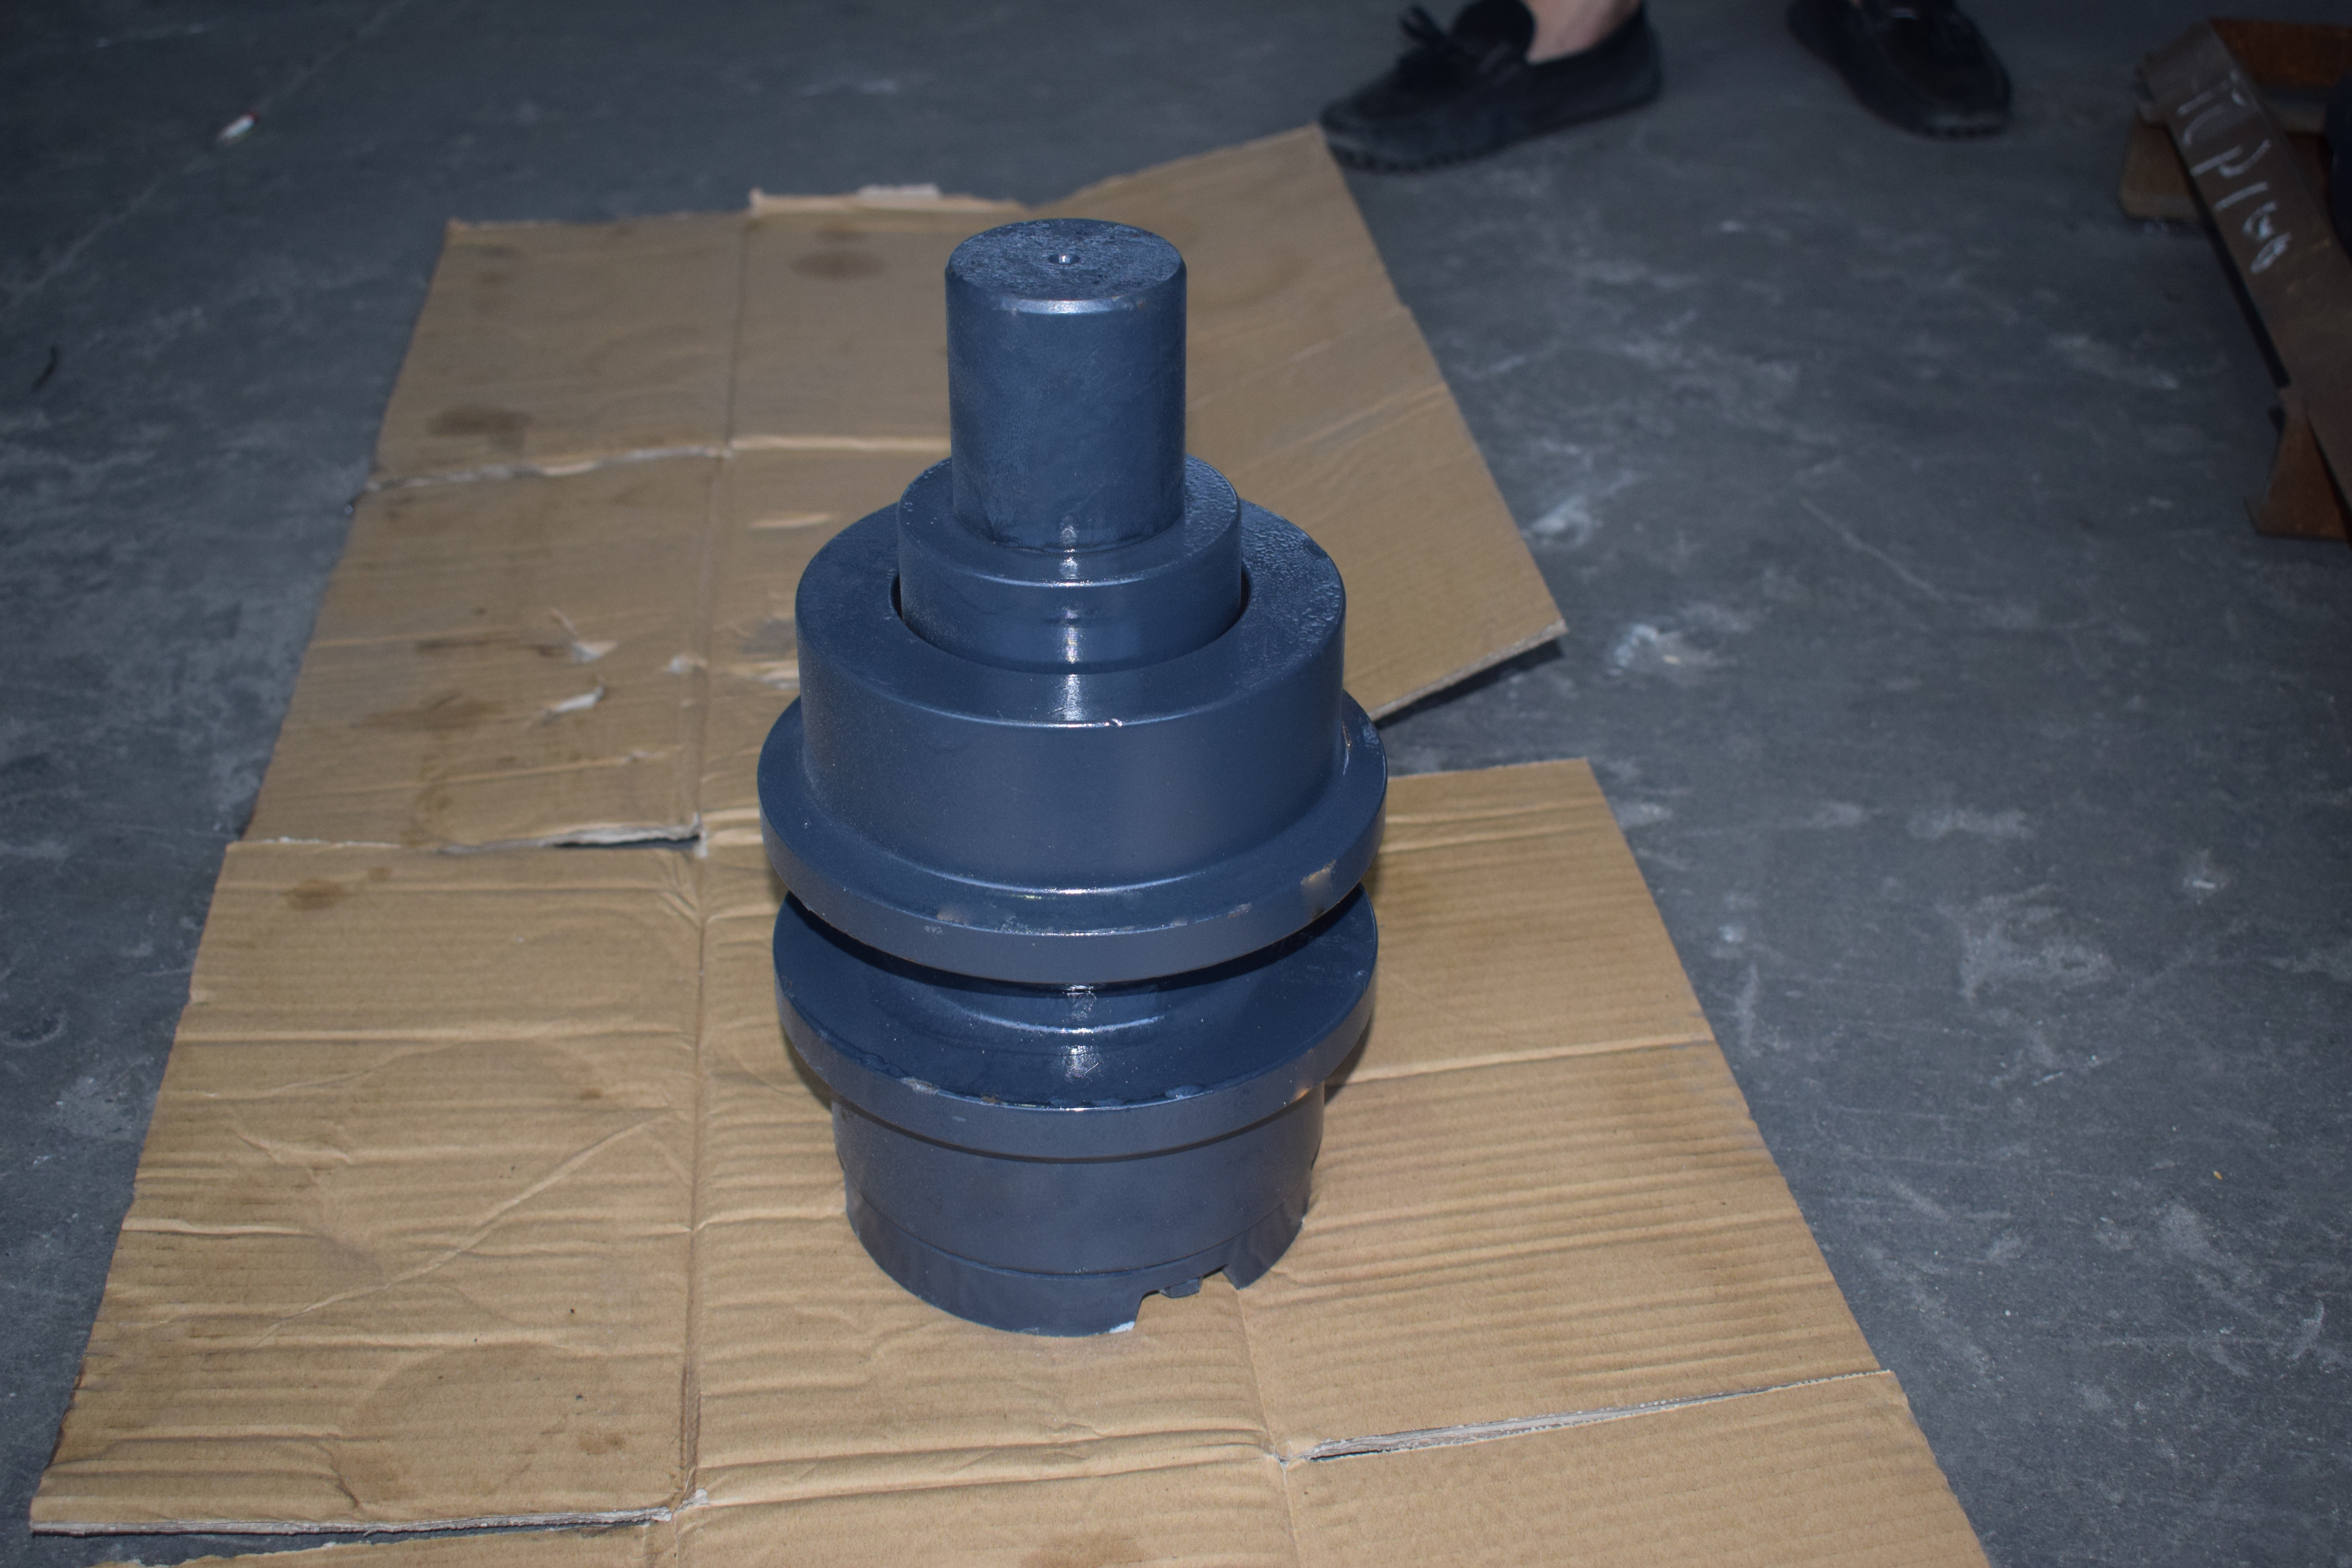 PC120 Top Carrier Roller undercarriage